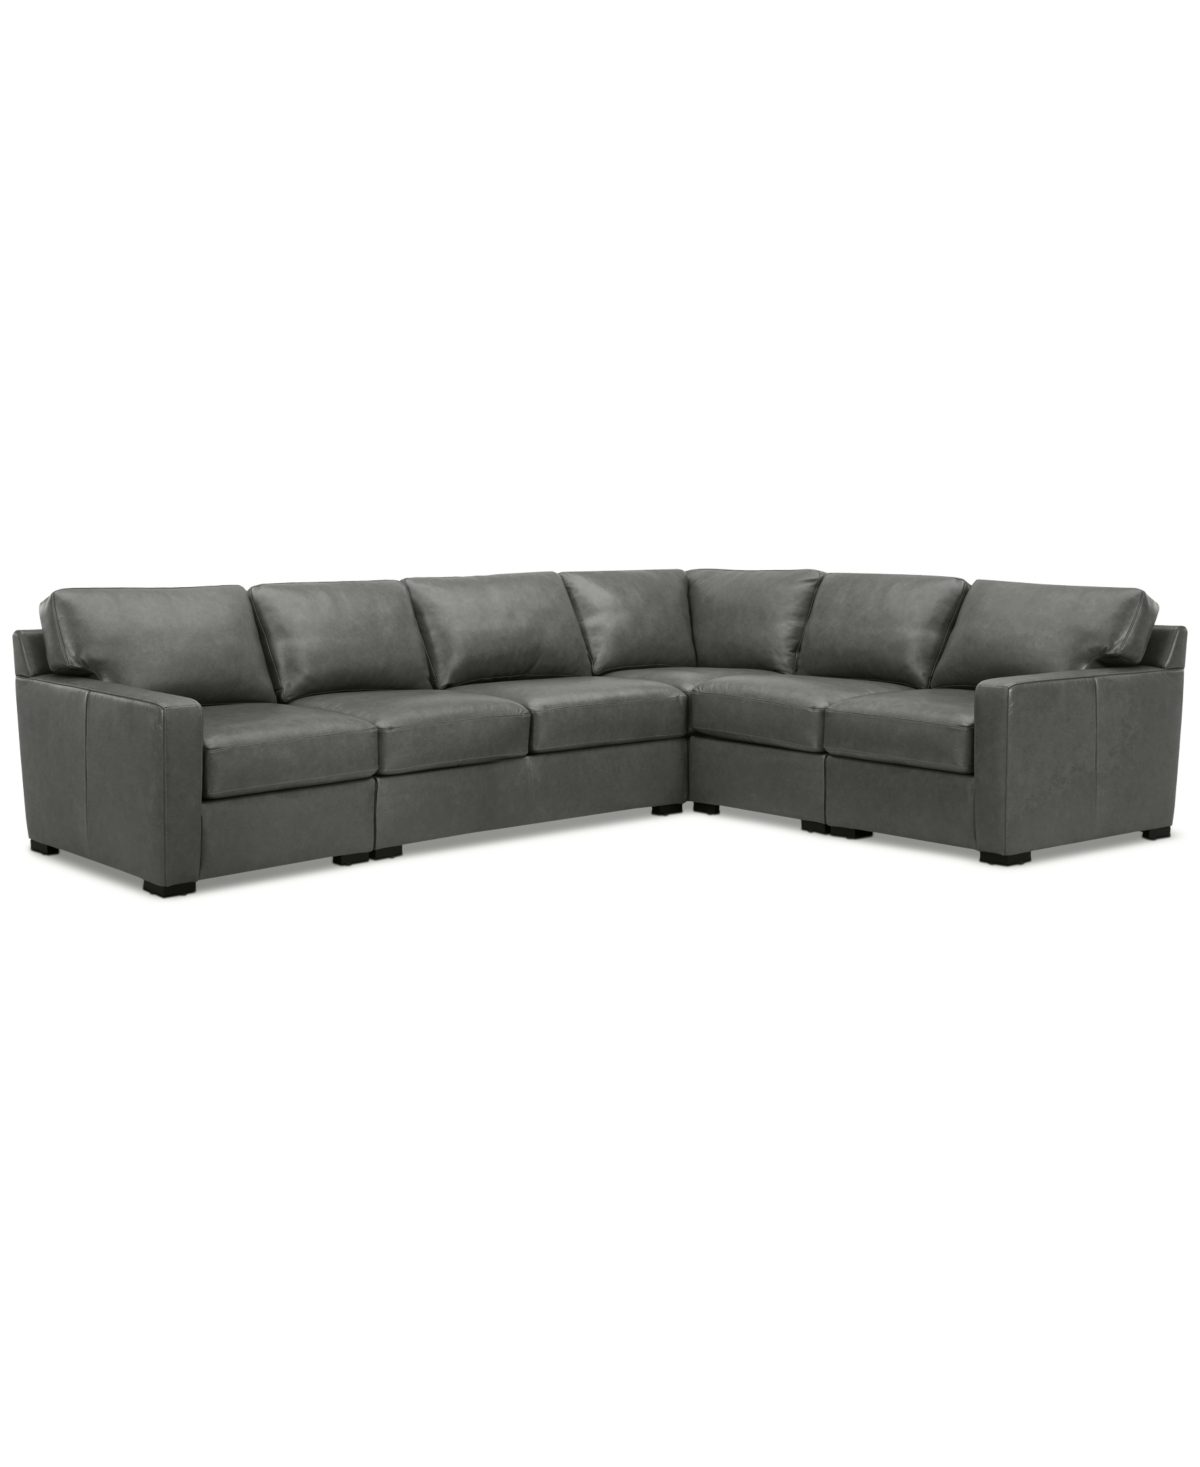 Shop Macy's Radley 136" 5-pc. Leather Square Corner L Shape Modular Sectional In Anthracite